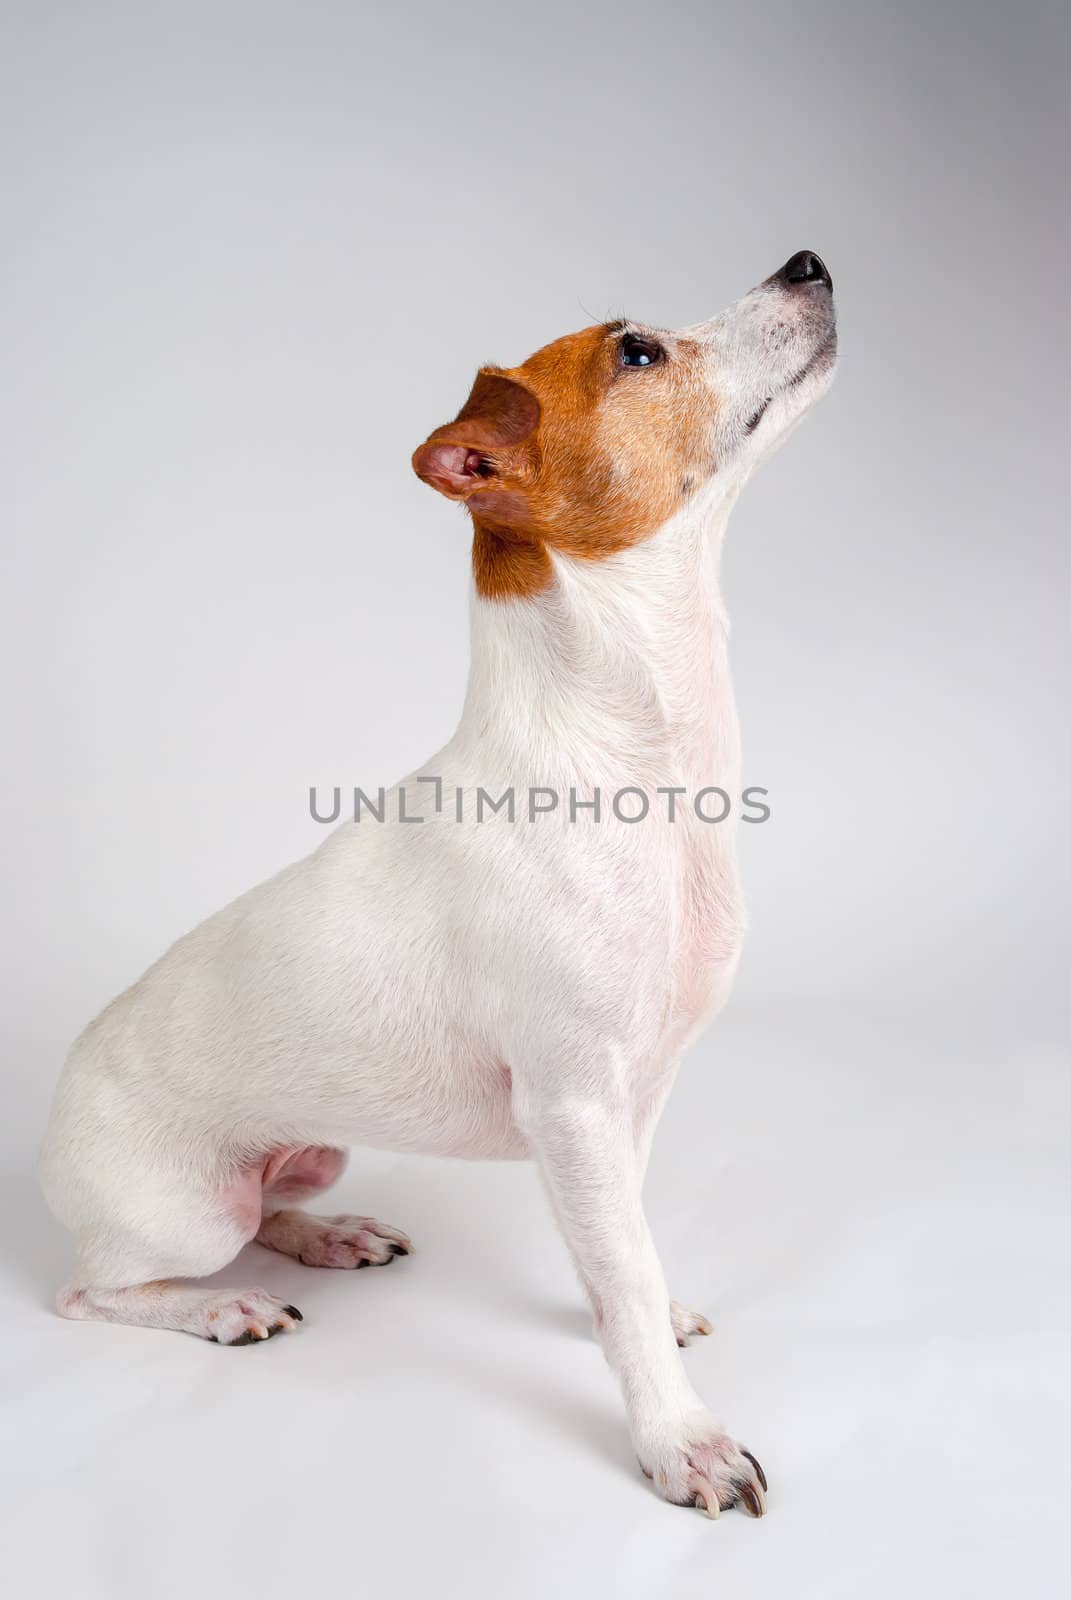 Photograph of a Jack Russell Terrier looking off camera.